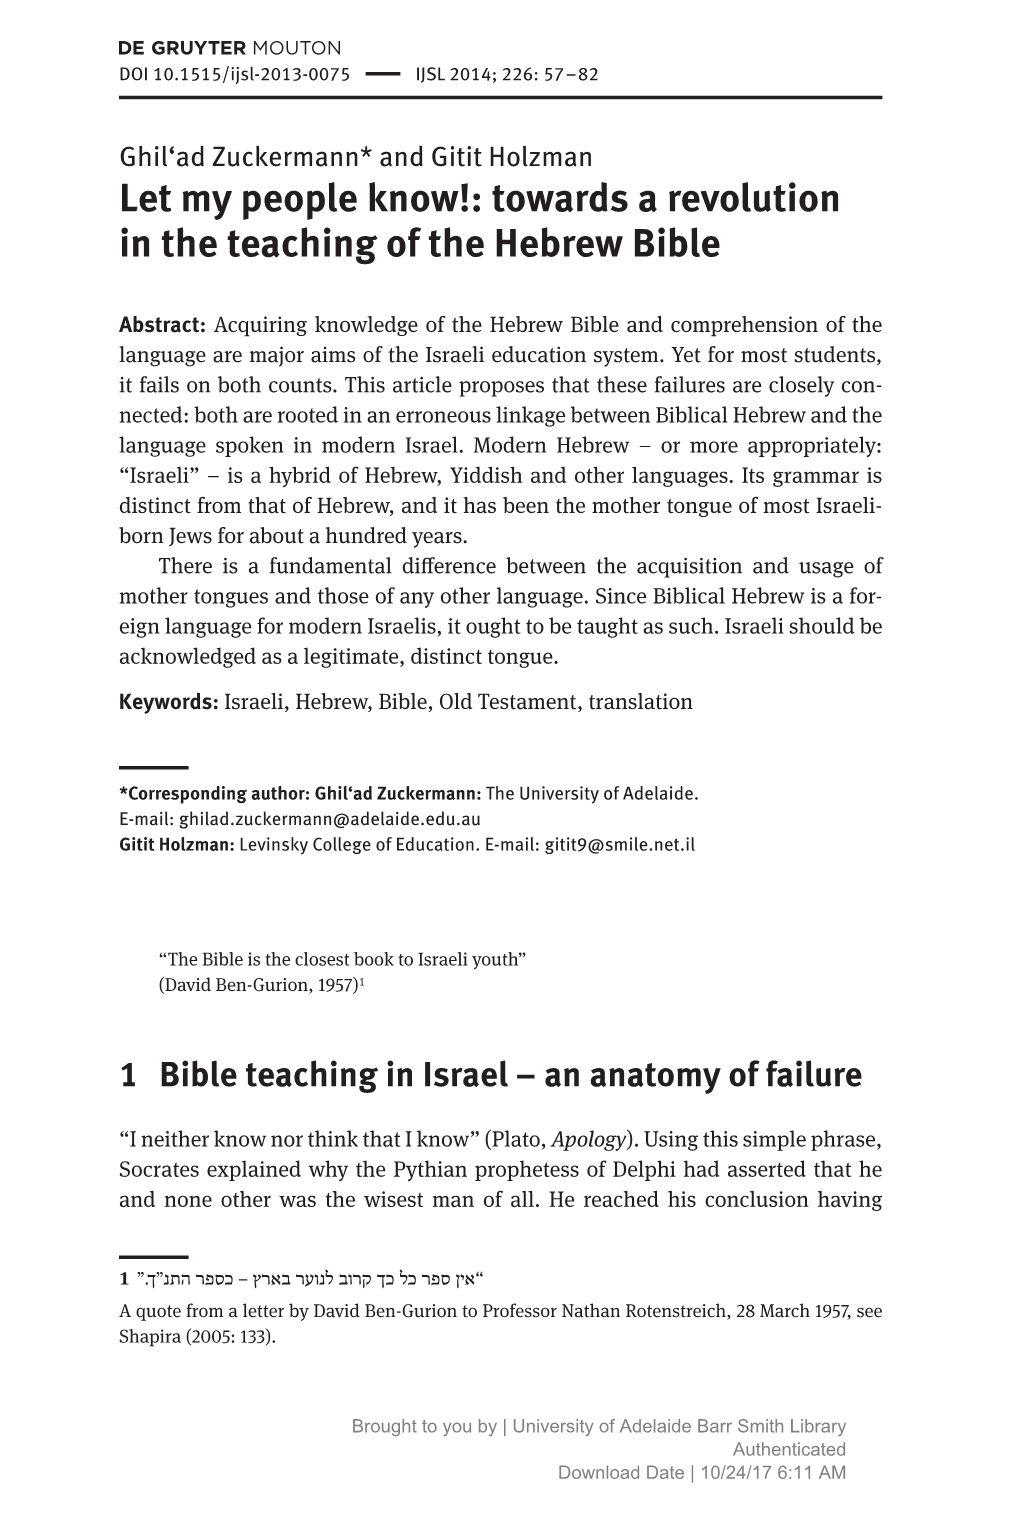 Towards a Revolution in the Teaching of the Hebrew Bible